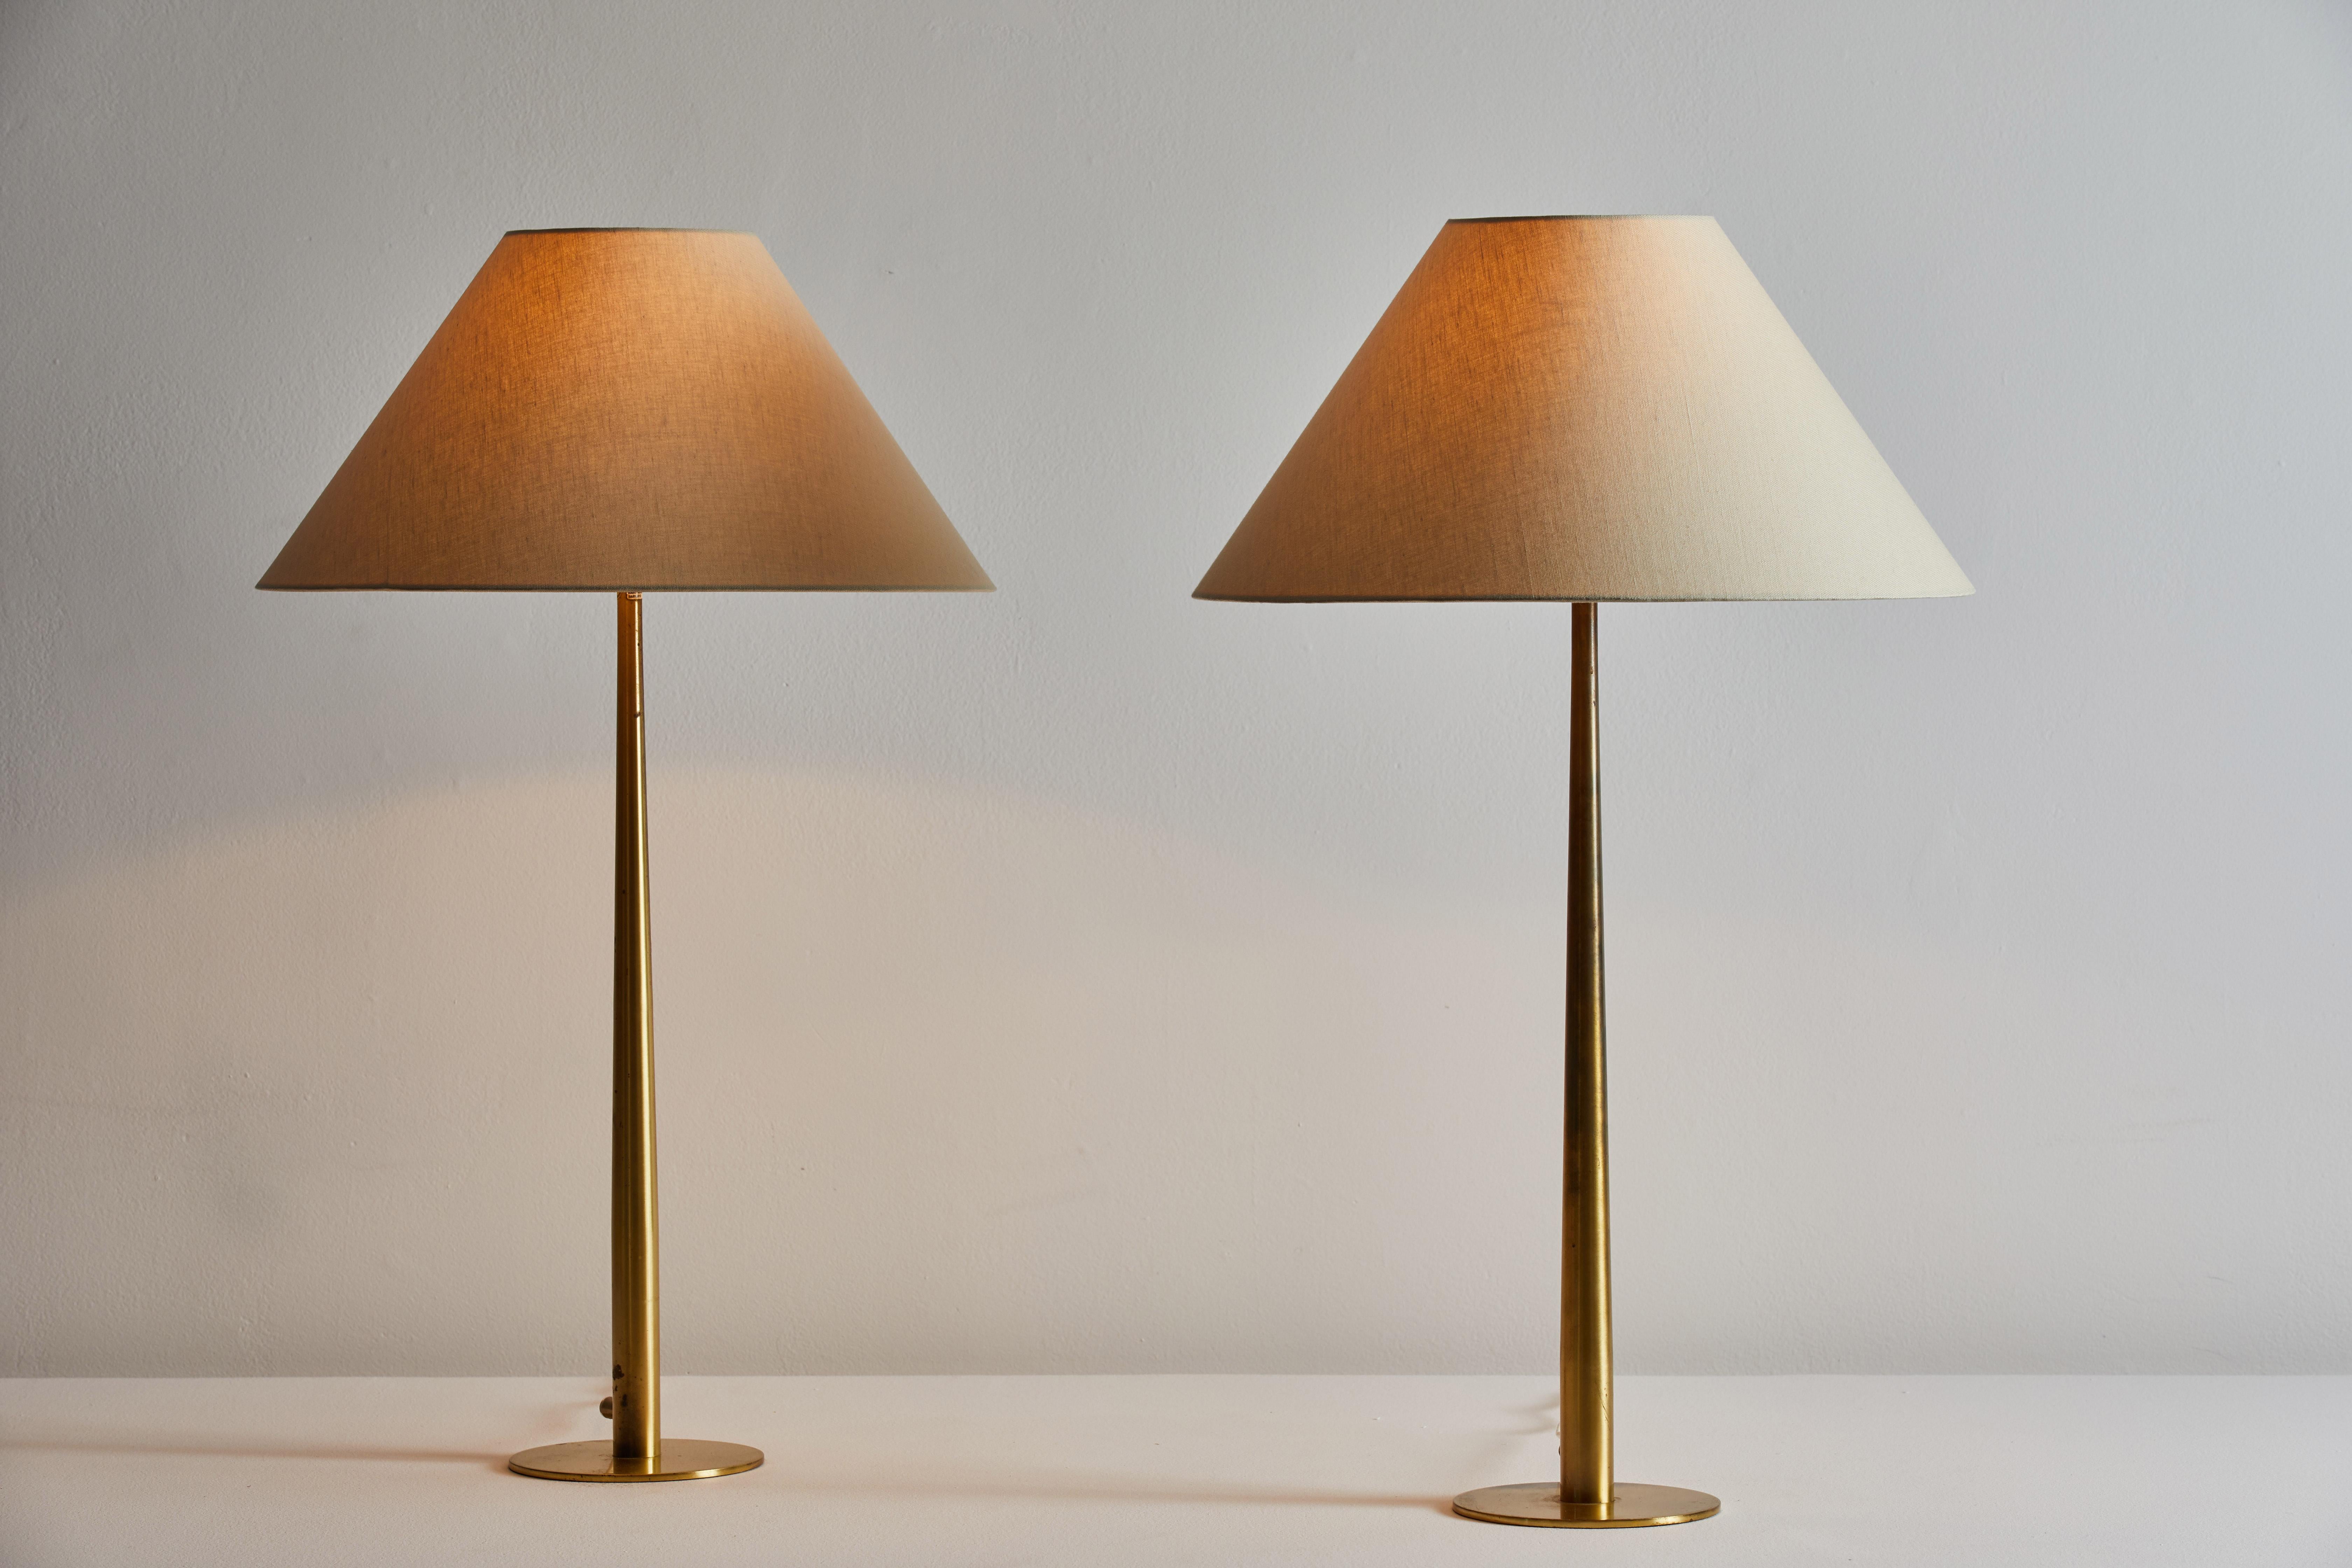 Pair of table lamps by Hans Agne Jakobsson. Designed in Sweden, circa 1960s. Brass stems with custom fabricated linen shades. Original cords. Each light takes one E27 75w maximum bulb. Bulbs provided as a onetime courtesy. Retains original